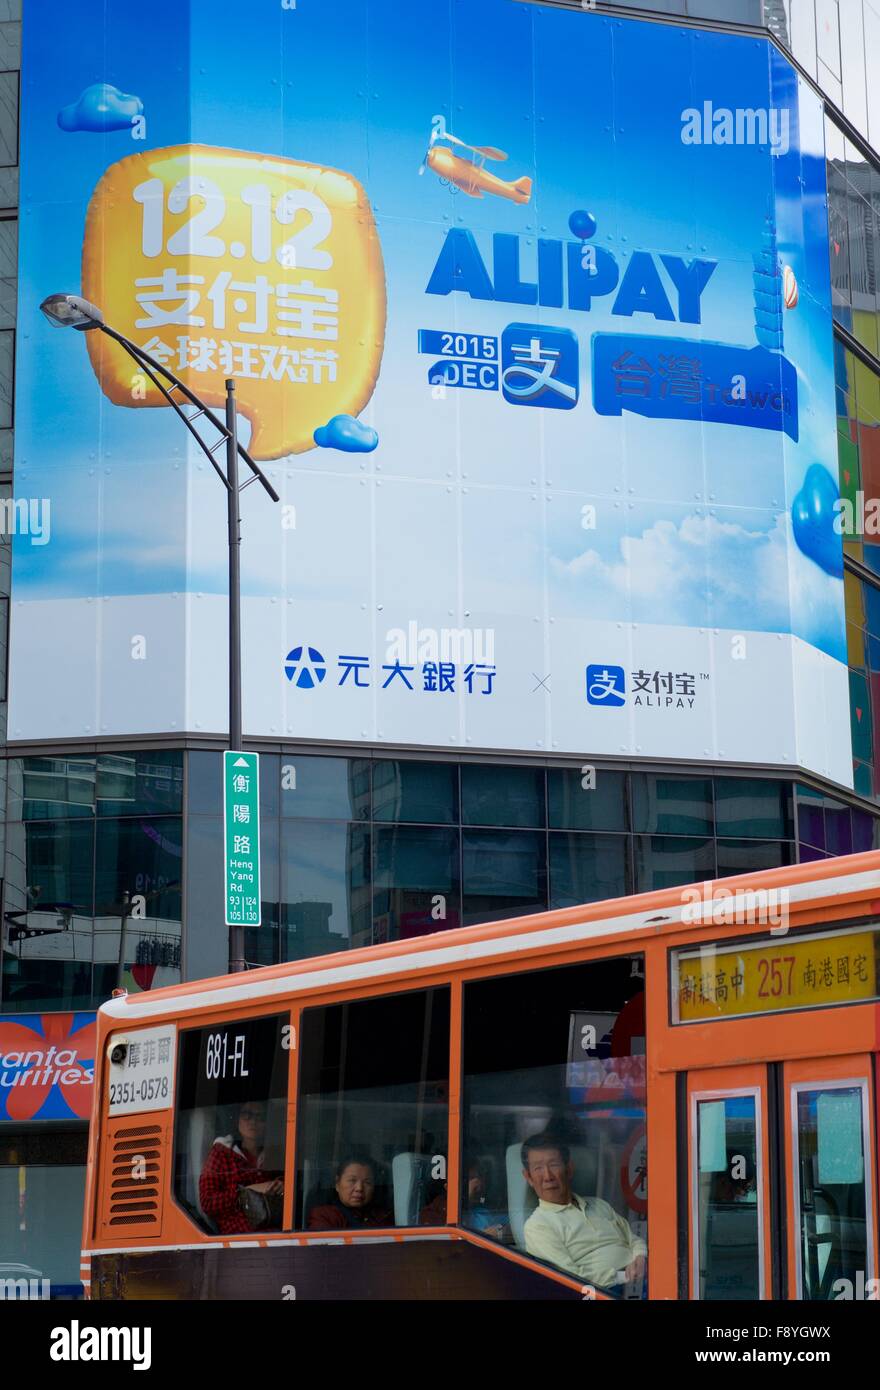 Taipei's Taiwan. 12th Dec, 2015. A poster shows alipay payment advertisement at Hengyang Road in Taipei, southeast China's Taiwan, Dec. 12, 2015. According to Alipay, the online payment service provider of Alibaba Group, 3,500 commercial enterprises in Taiwan have accepted Alipay payment since the promotion began on Dec. 1. © Jiang Kehong/Xinhua/Alamy Live News Stock Photo